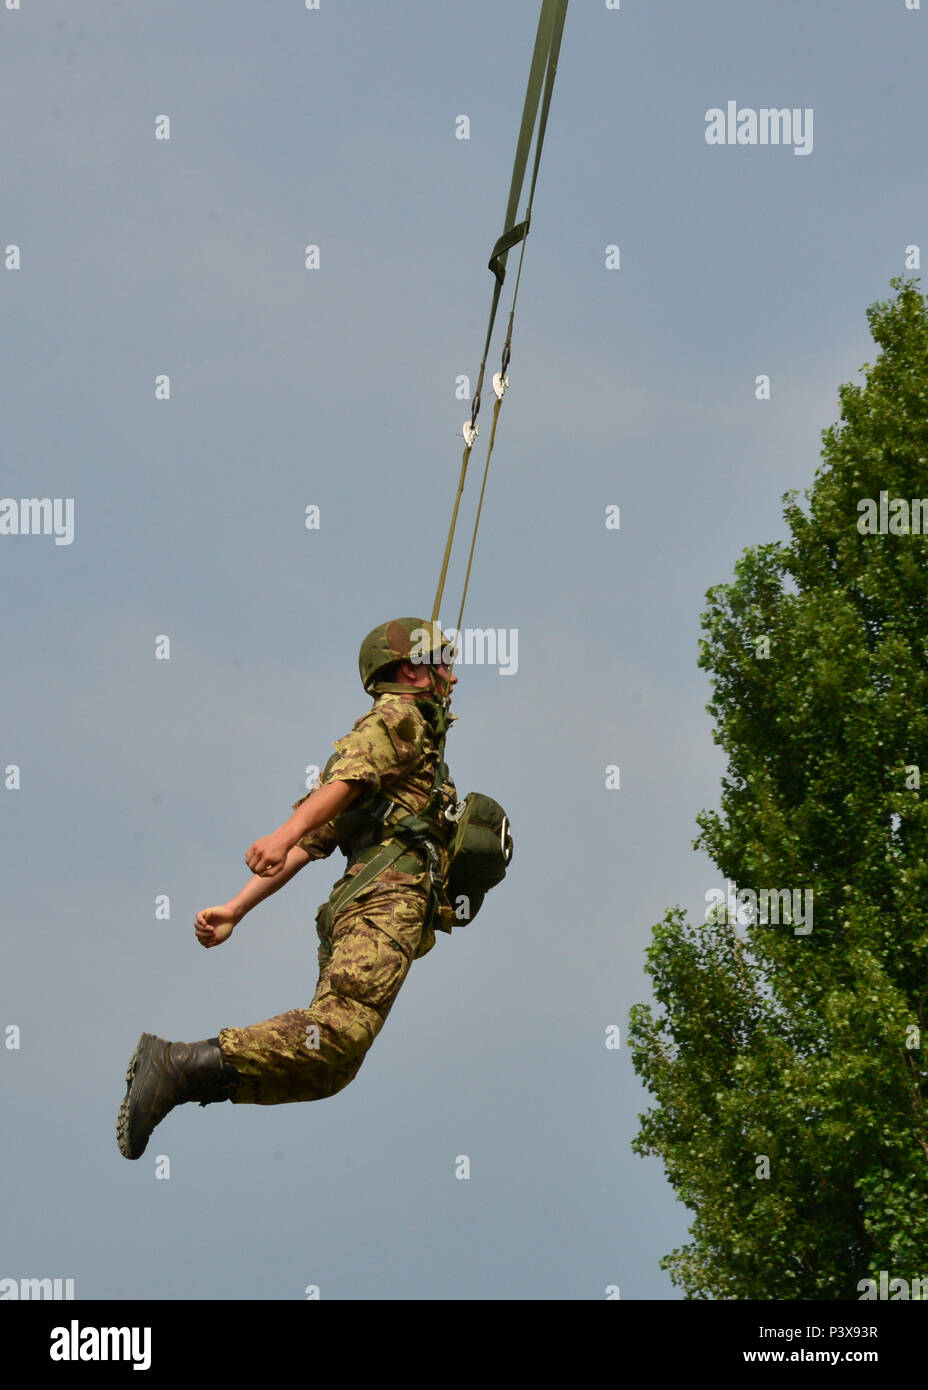 An Italian army cadet, assigned to the Centre of Excellence Italian Airborne Folgore in Pisa, exits the 7th Army Training Command tower during basic airborne training at Caserma Ederle, Vicenza, Italy, July 12, 2016. The 7th Army Training Command tower is 34-feet high and the only Army jump tower in Europe. (Photo by Visual Information Specialist Massimo Bovo/Released) Stock Photo